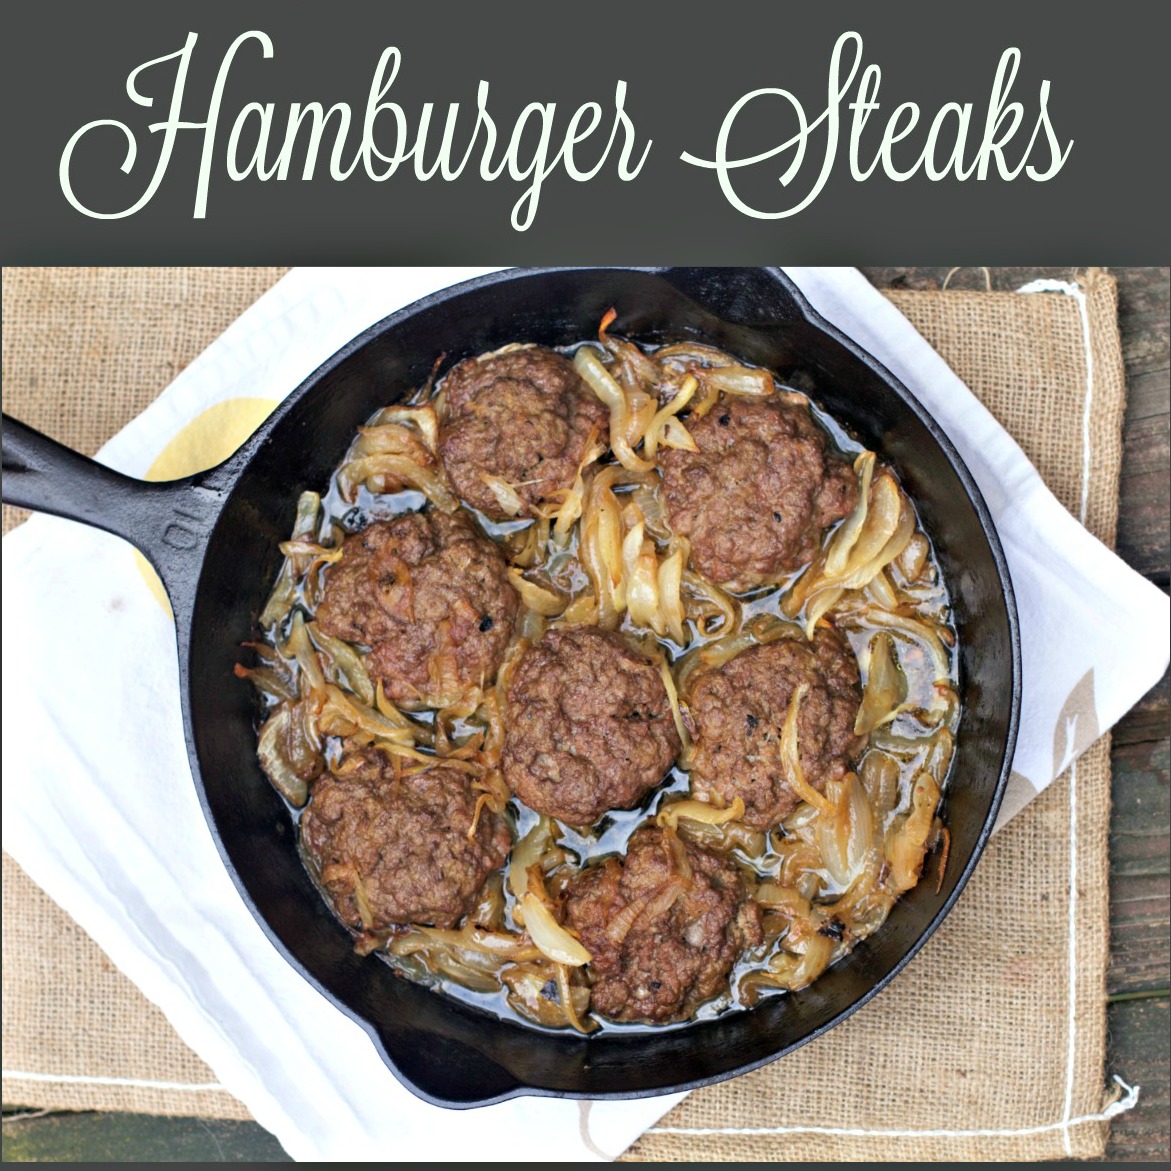 Easy Hamburger Steak Recipes from Spinach TIger